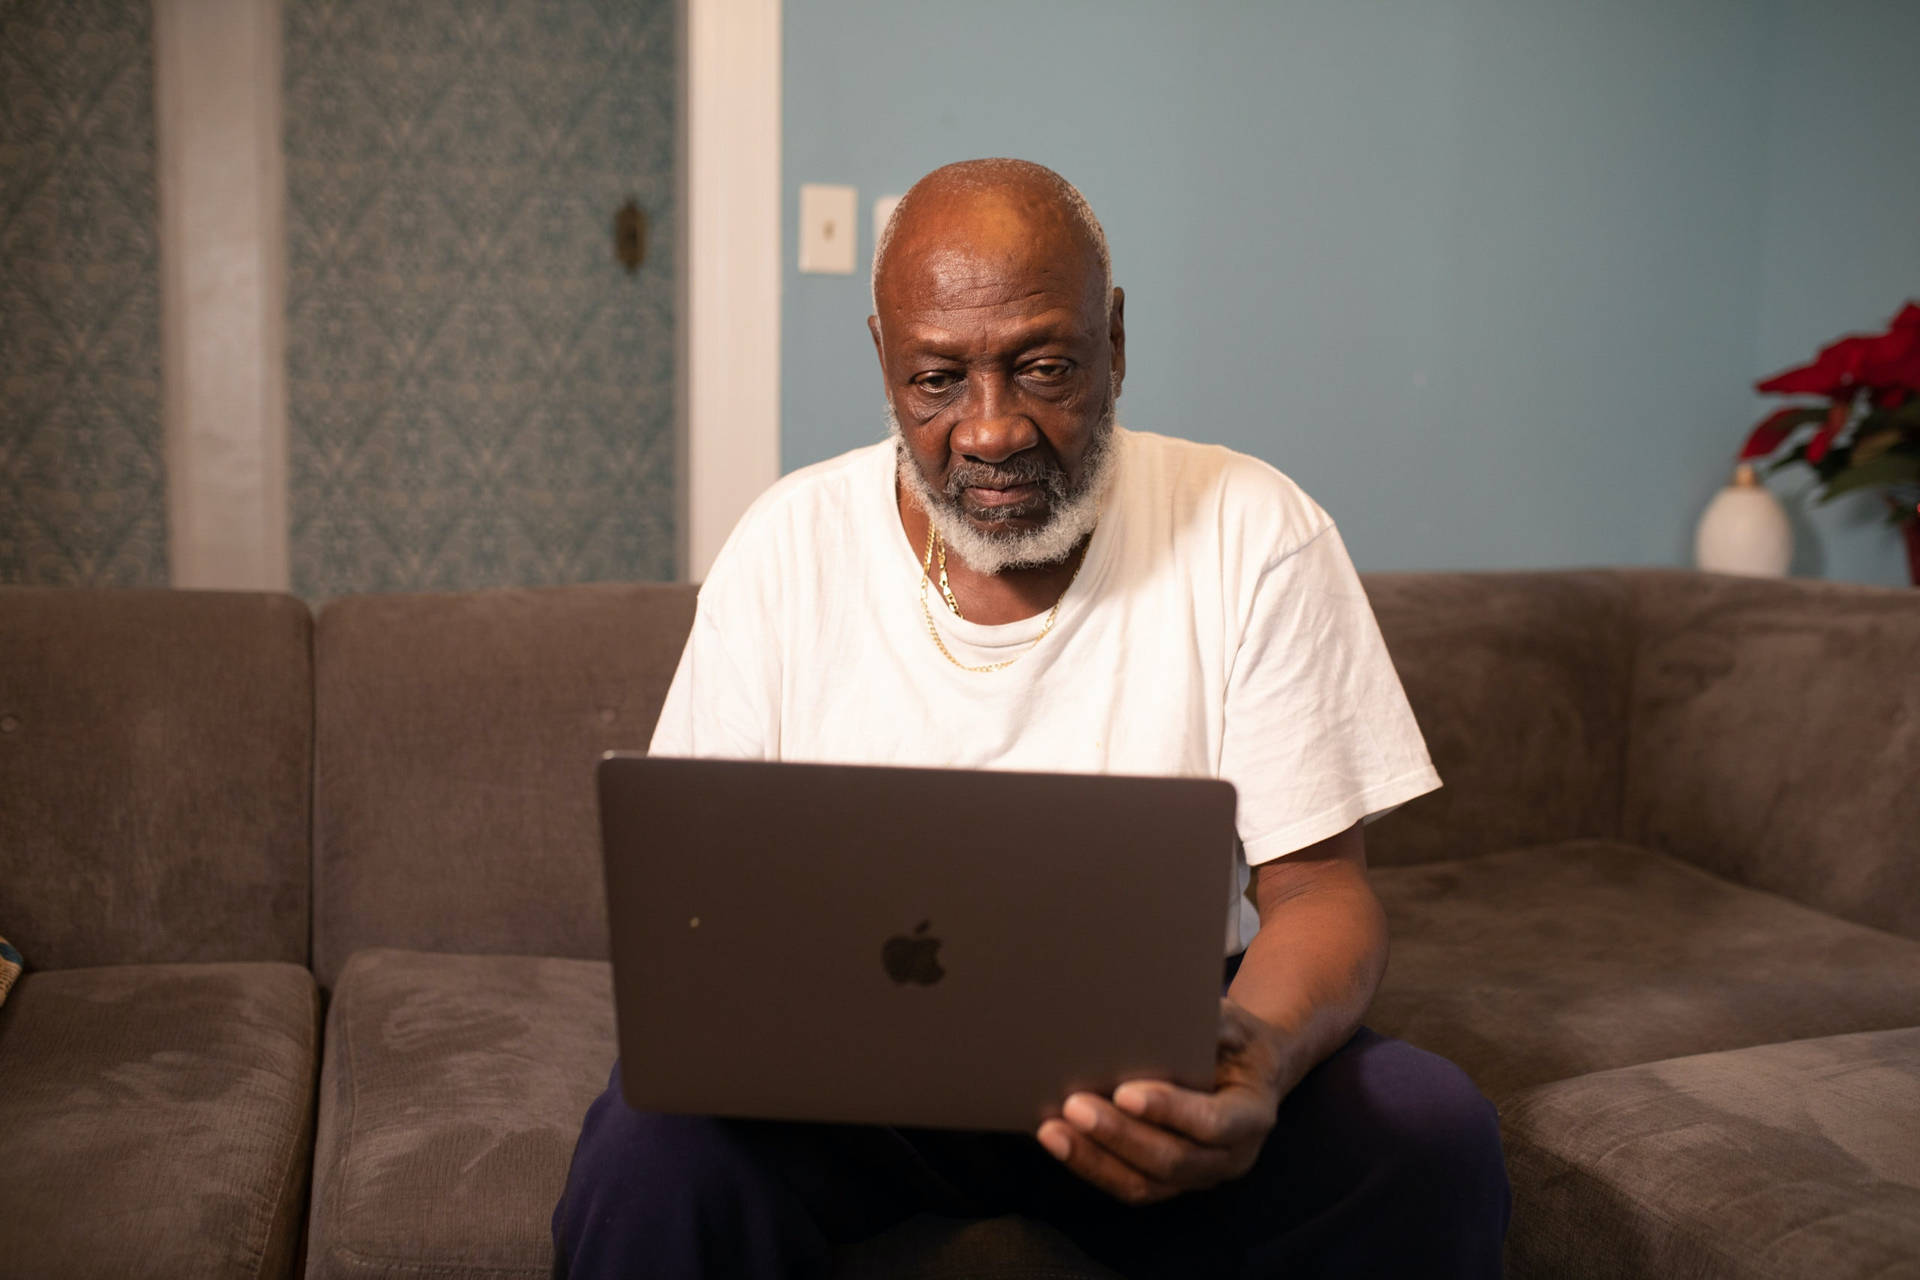 Old Black Man Using Laptop On Couch